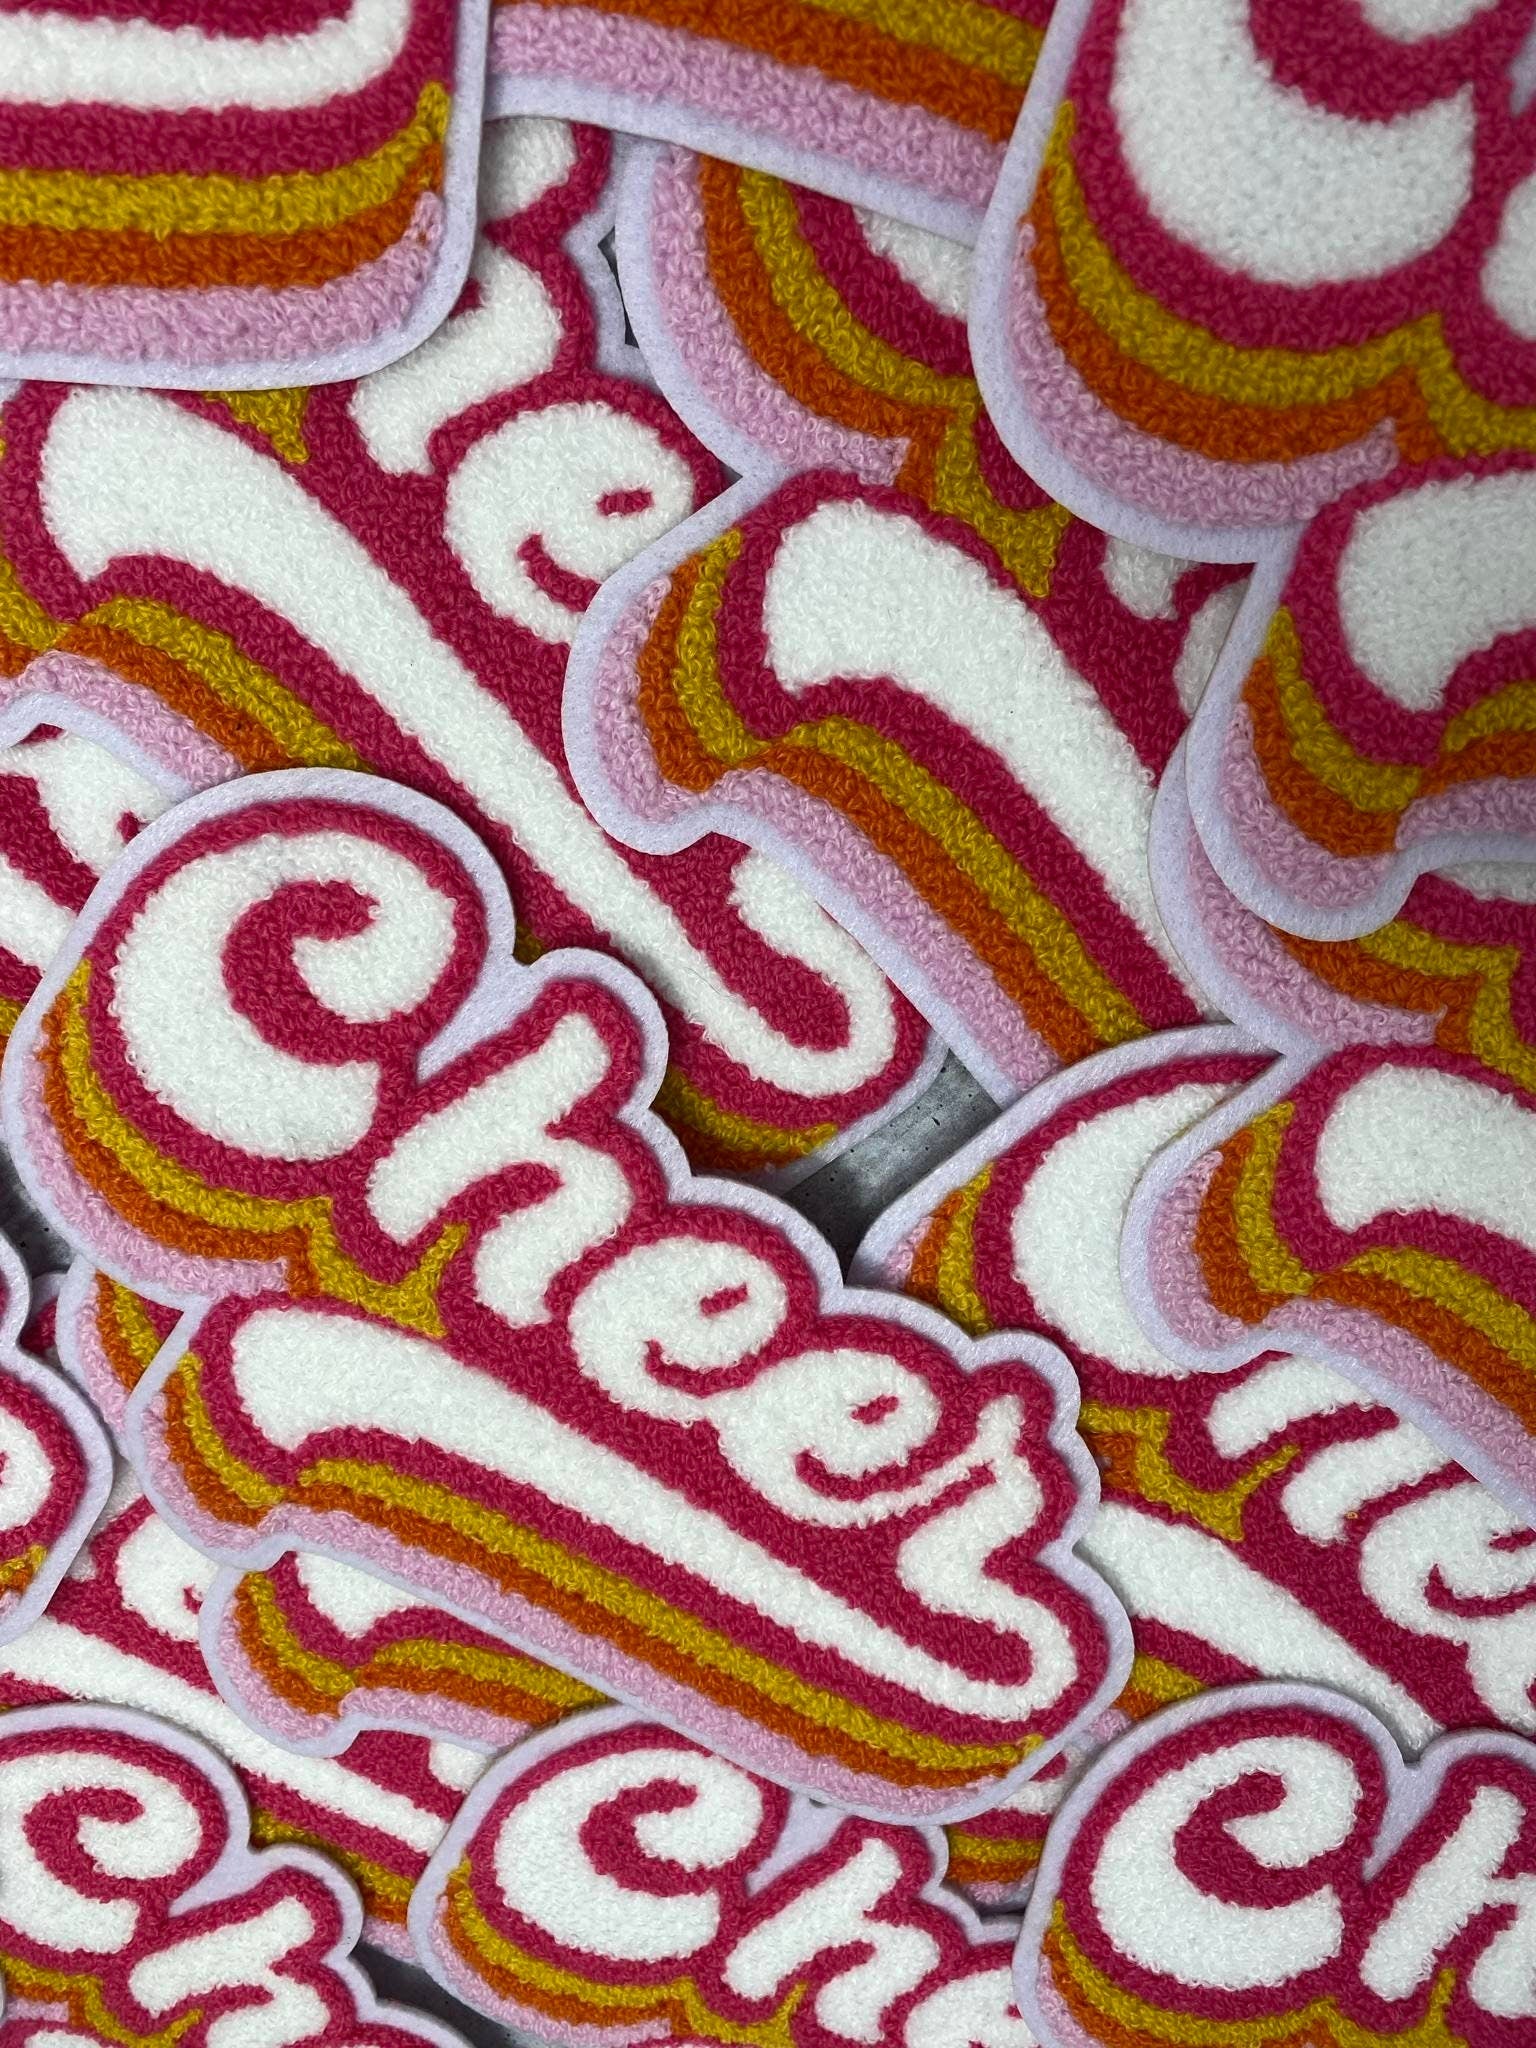 Chenille, "Colorful Cheer" Pink/Gold/Orange/White, Varsity Patch, Iron-on Applique for Jackets, Camo, & Bags, Size 7.5", Cheerleader Patch